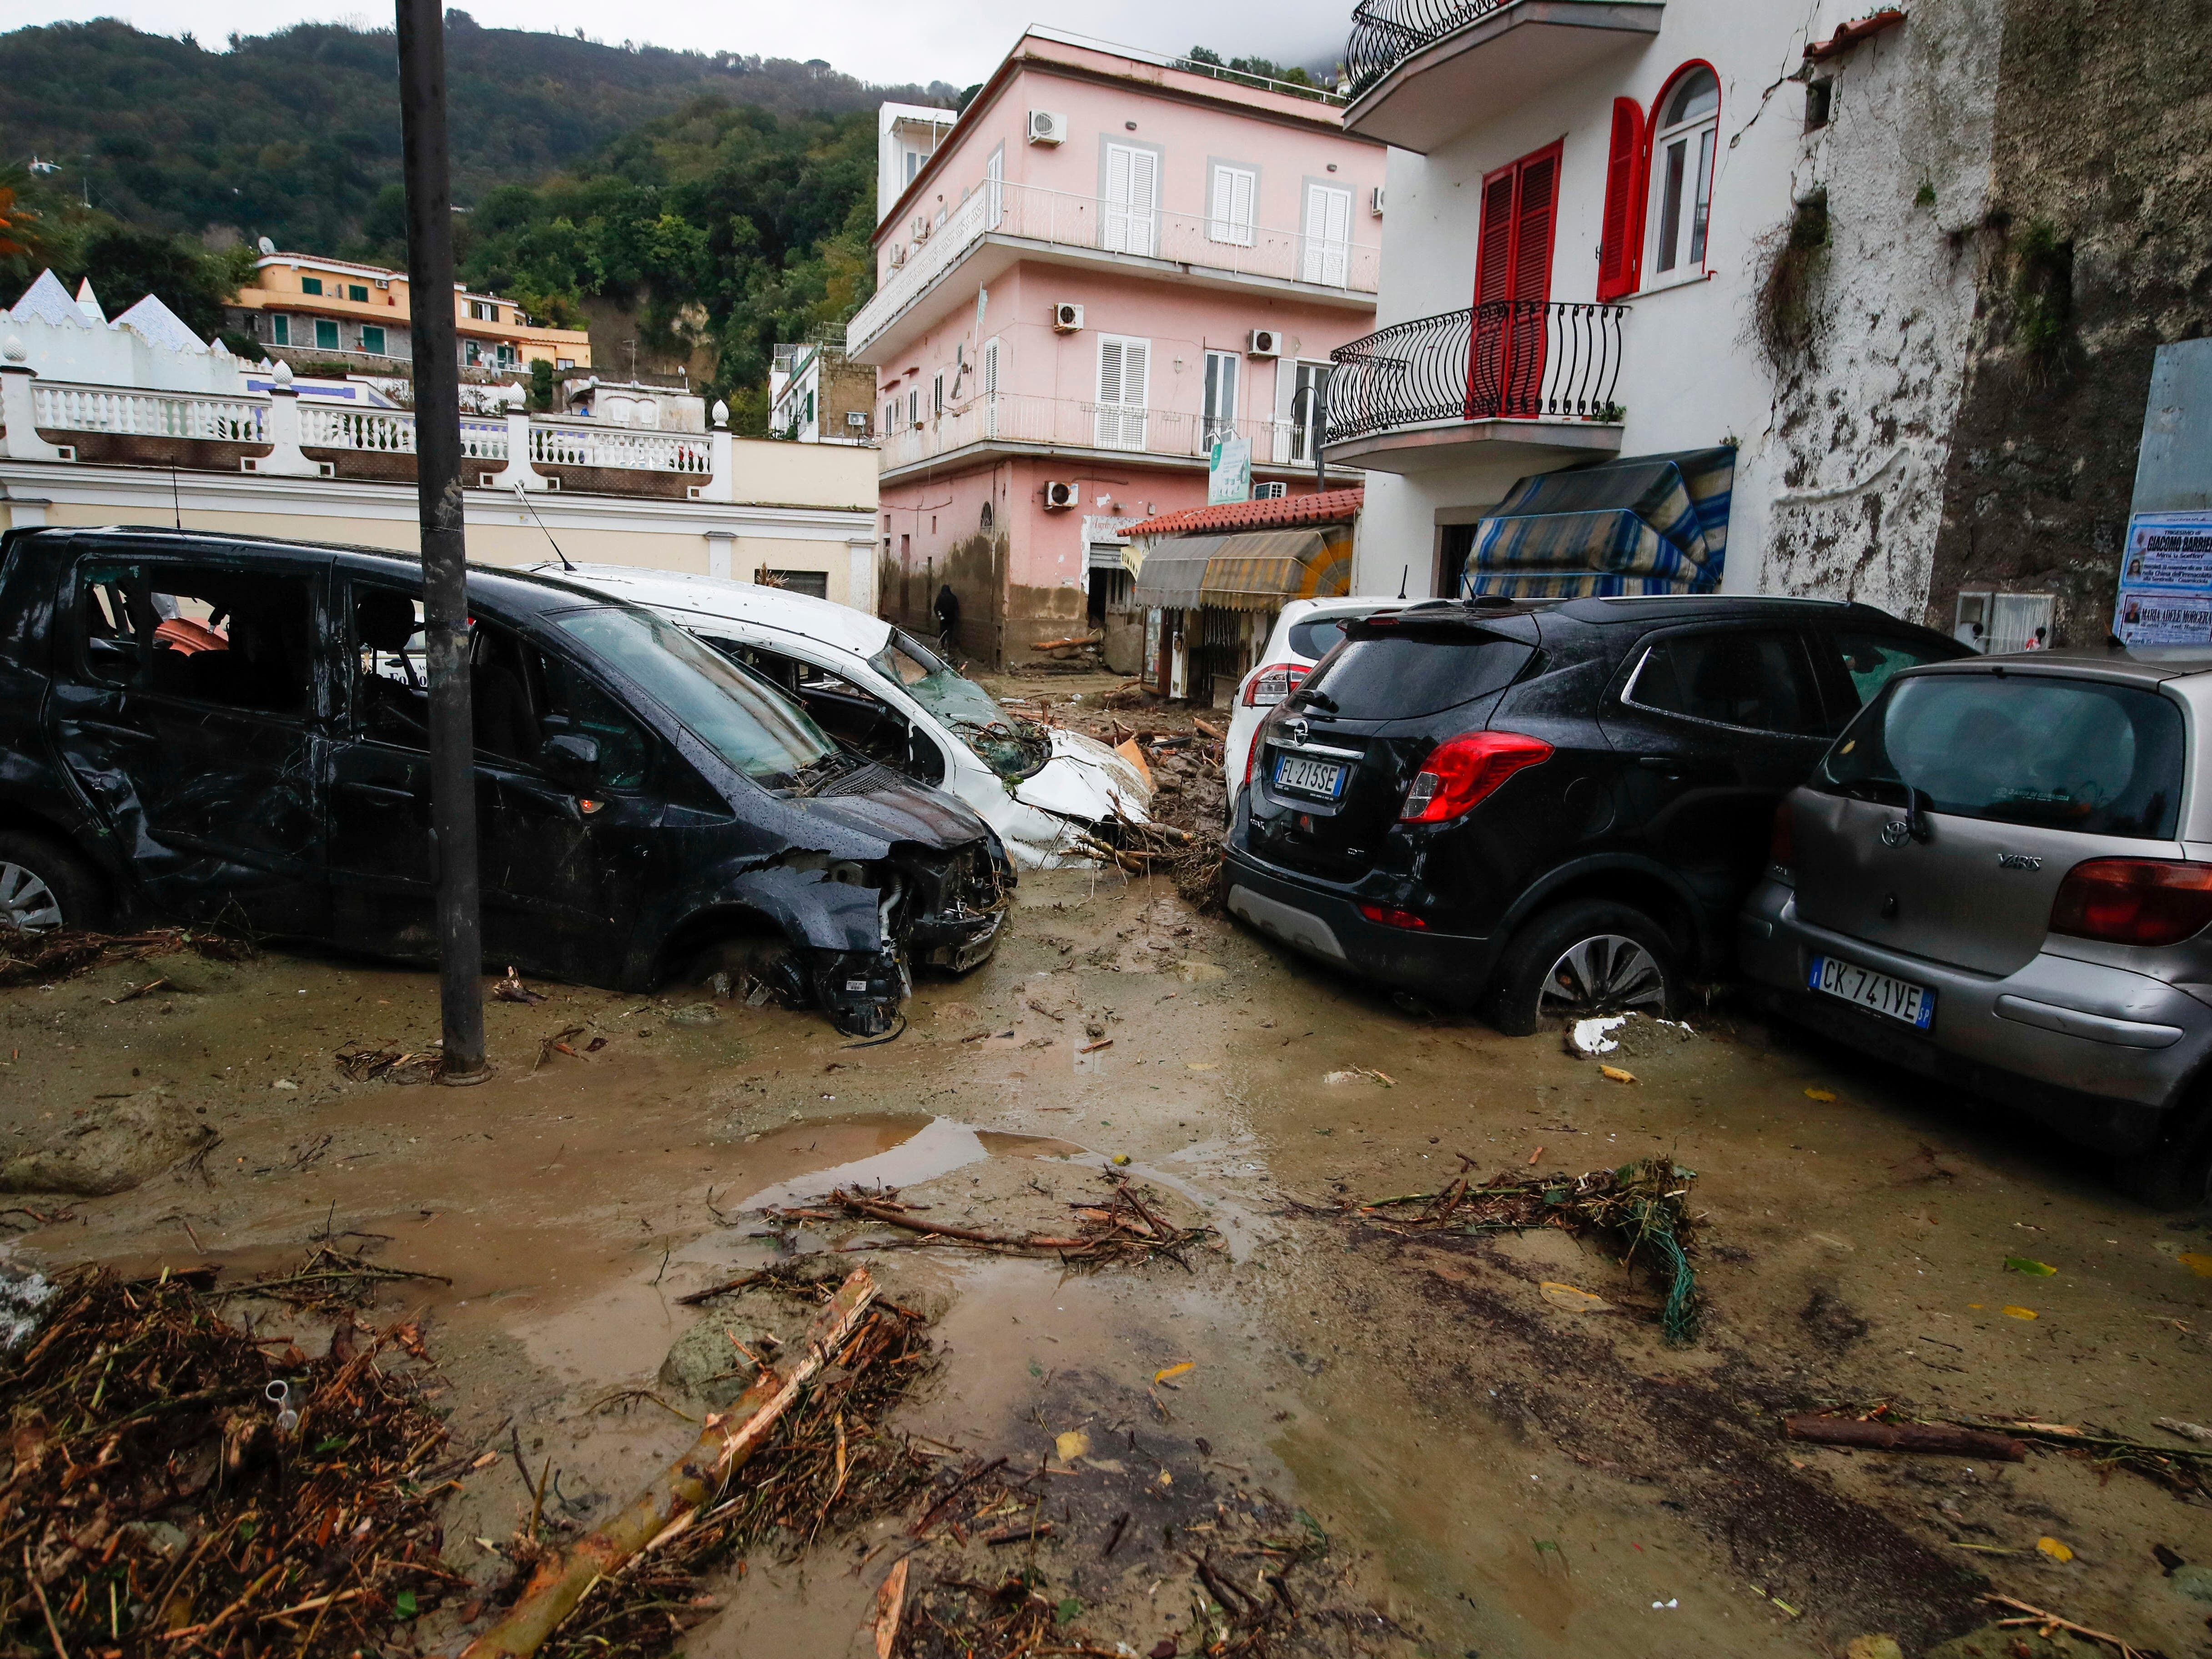 Body of girl found in Italy landslide as death toll rises to two